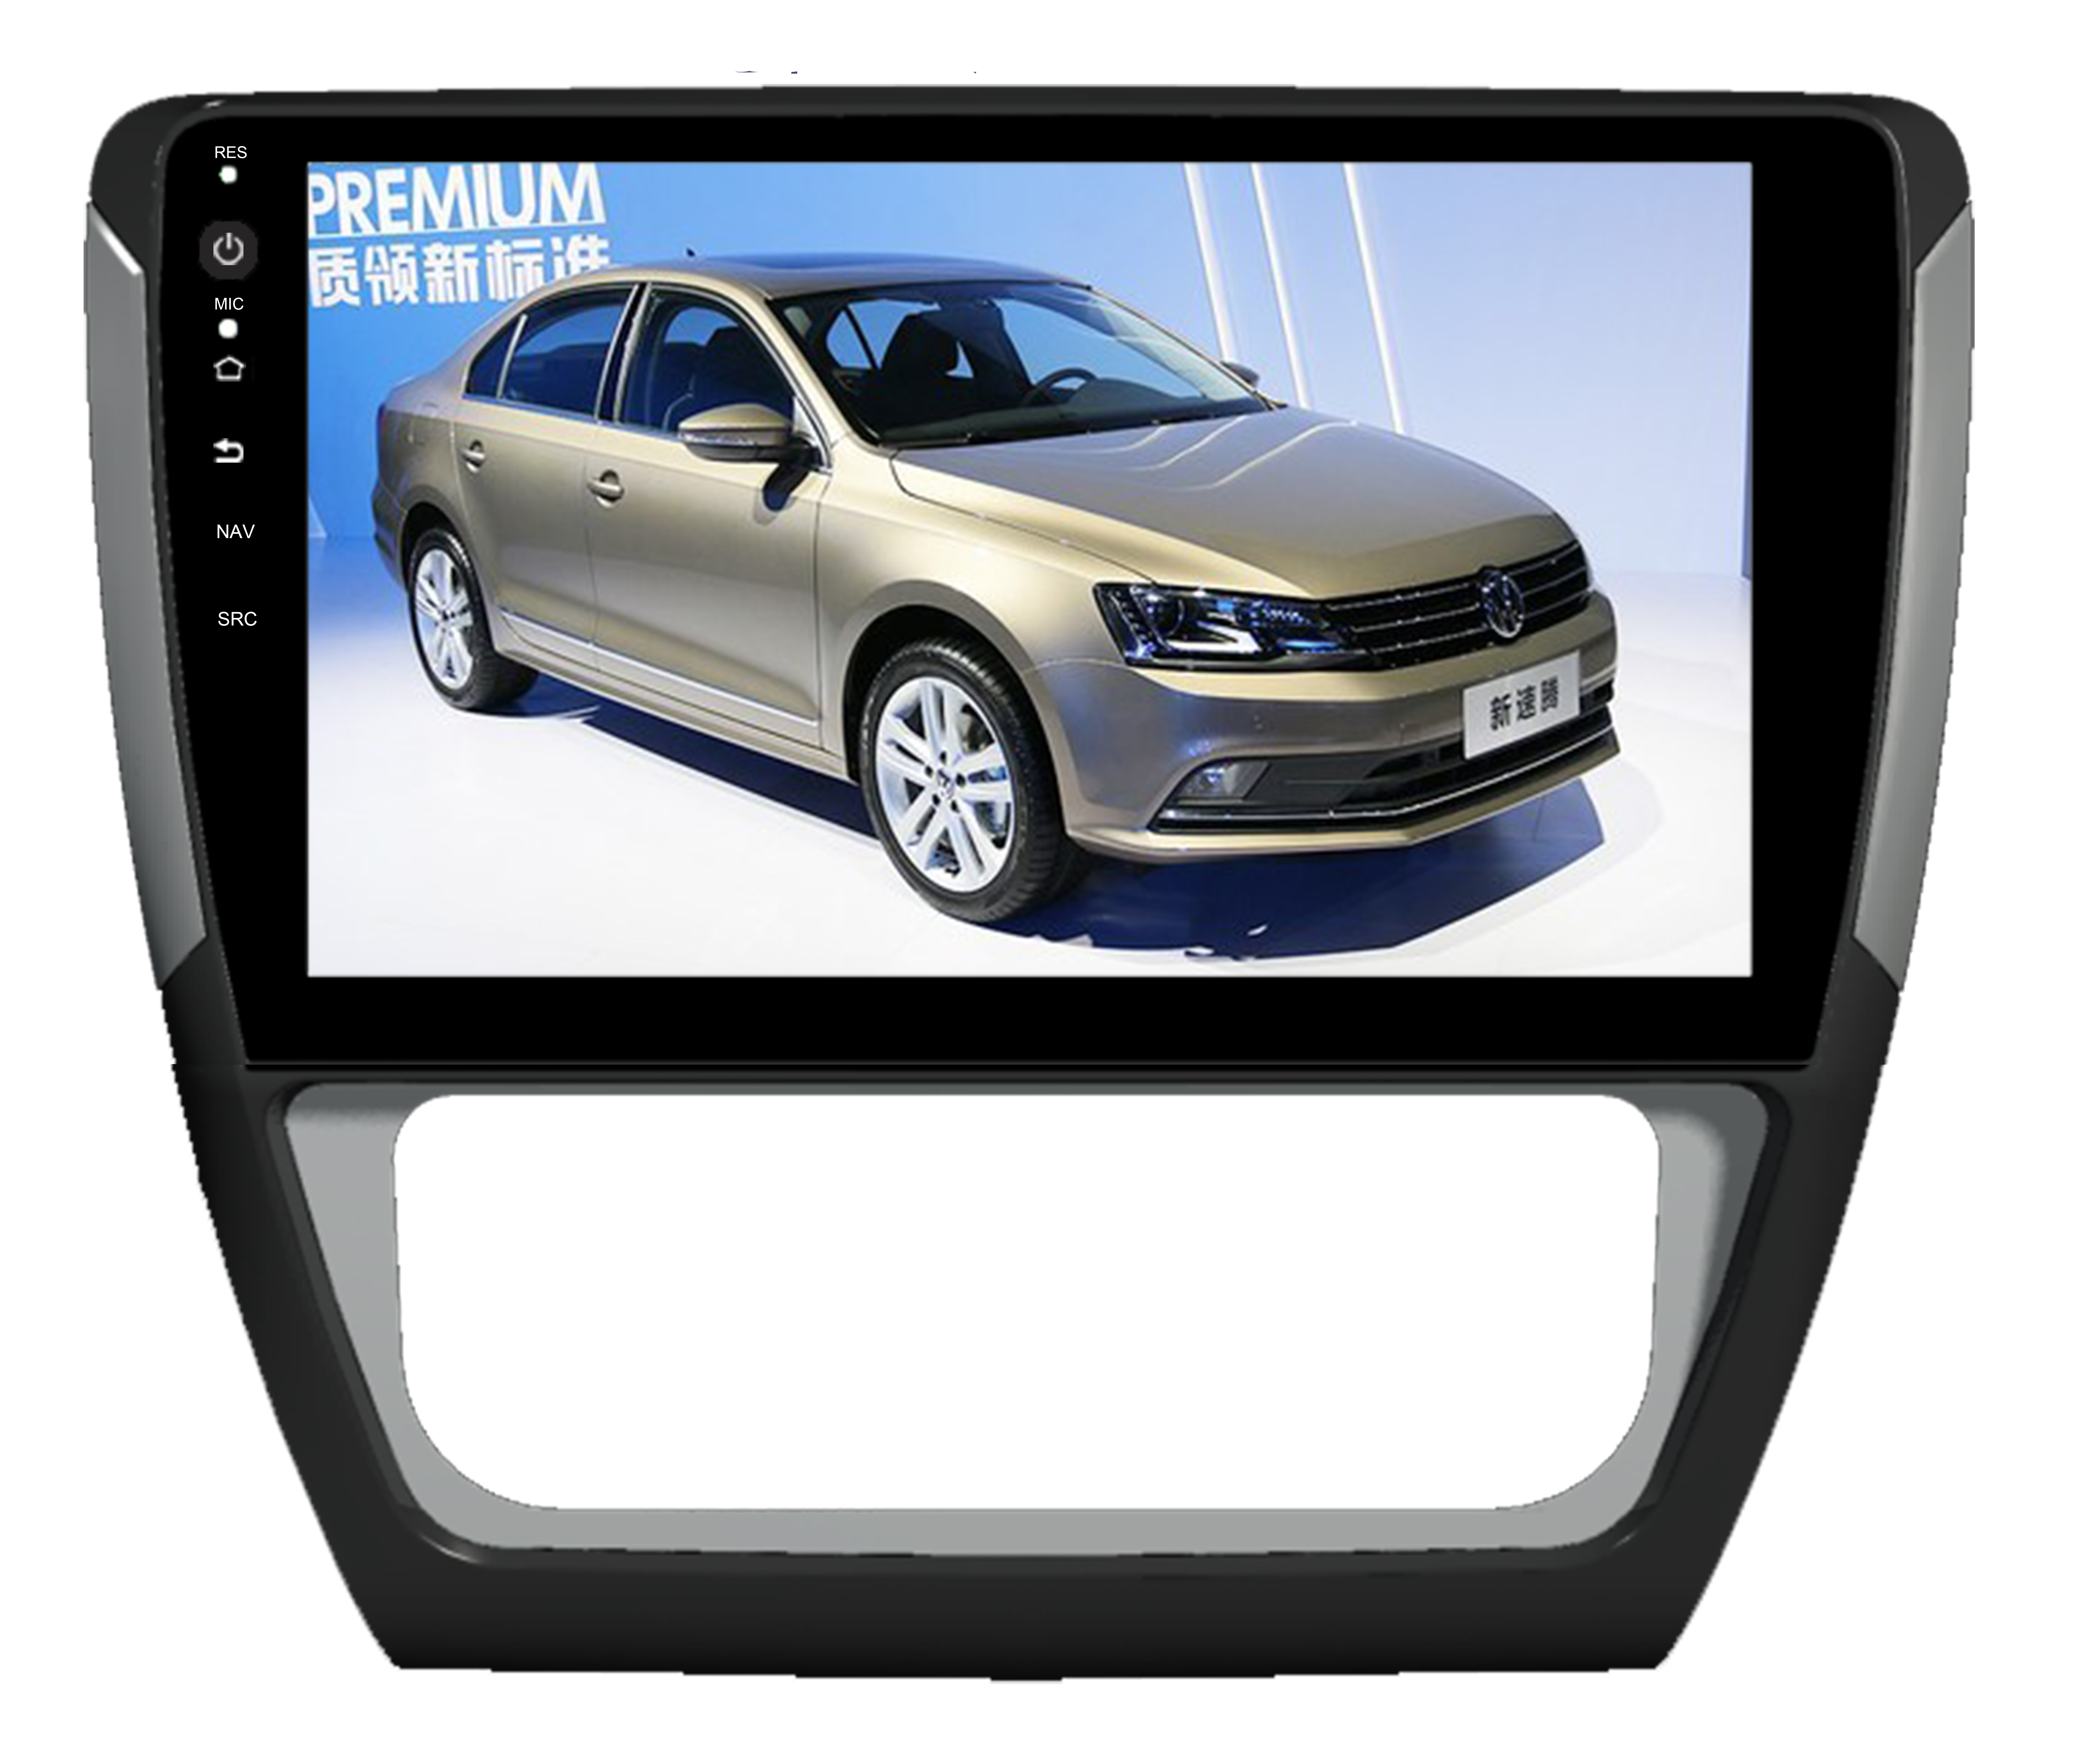 VW SAGITAR 2013 14 15 10.1'' HD Touch Screen Car Pad Android 6.0/7.1 car stereo radio player GPS BT Wifi Mirror link 2G 32G Eight/Quad Cores Rearview